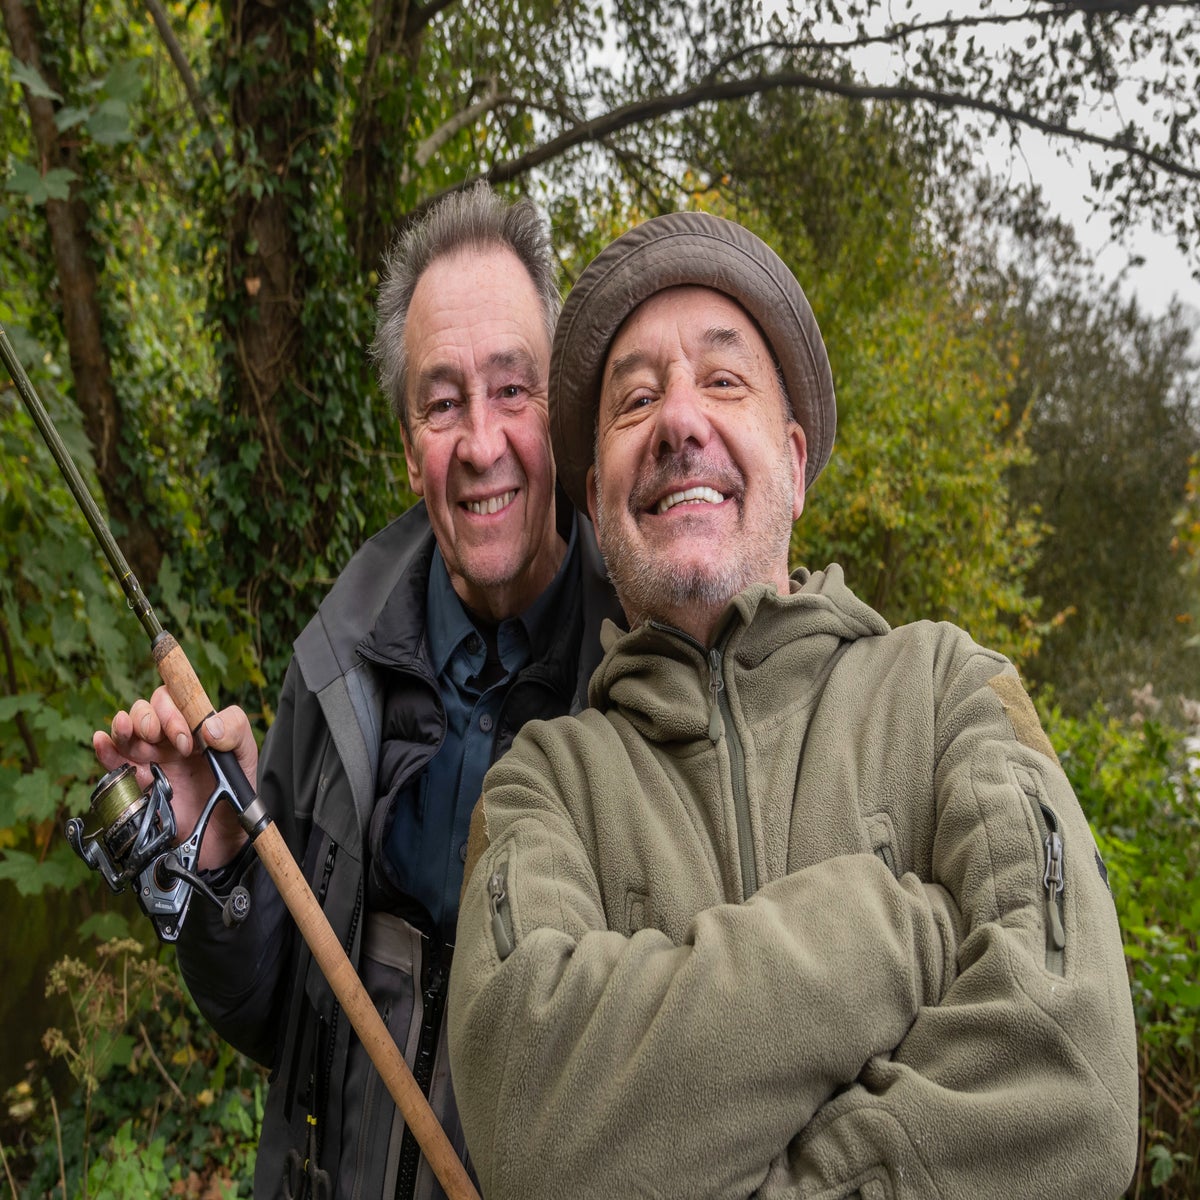 Bob Mortimer misses Gone Fishing due to health issues